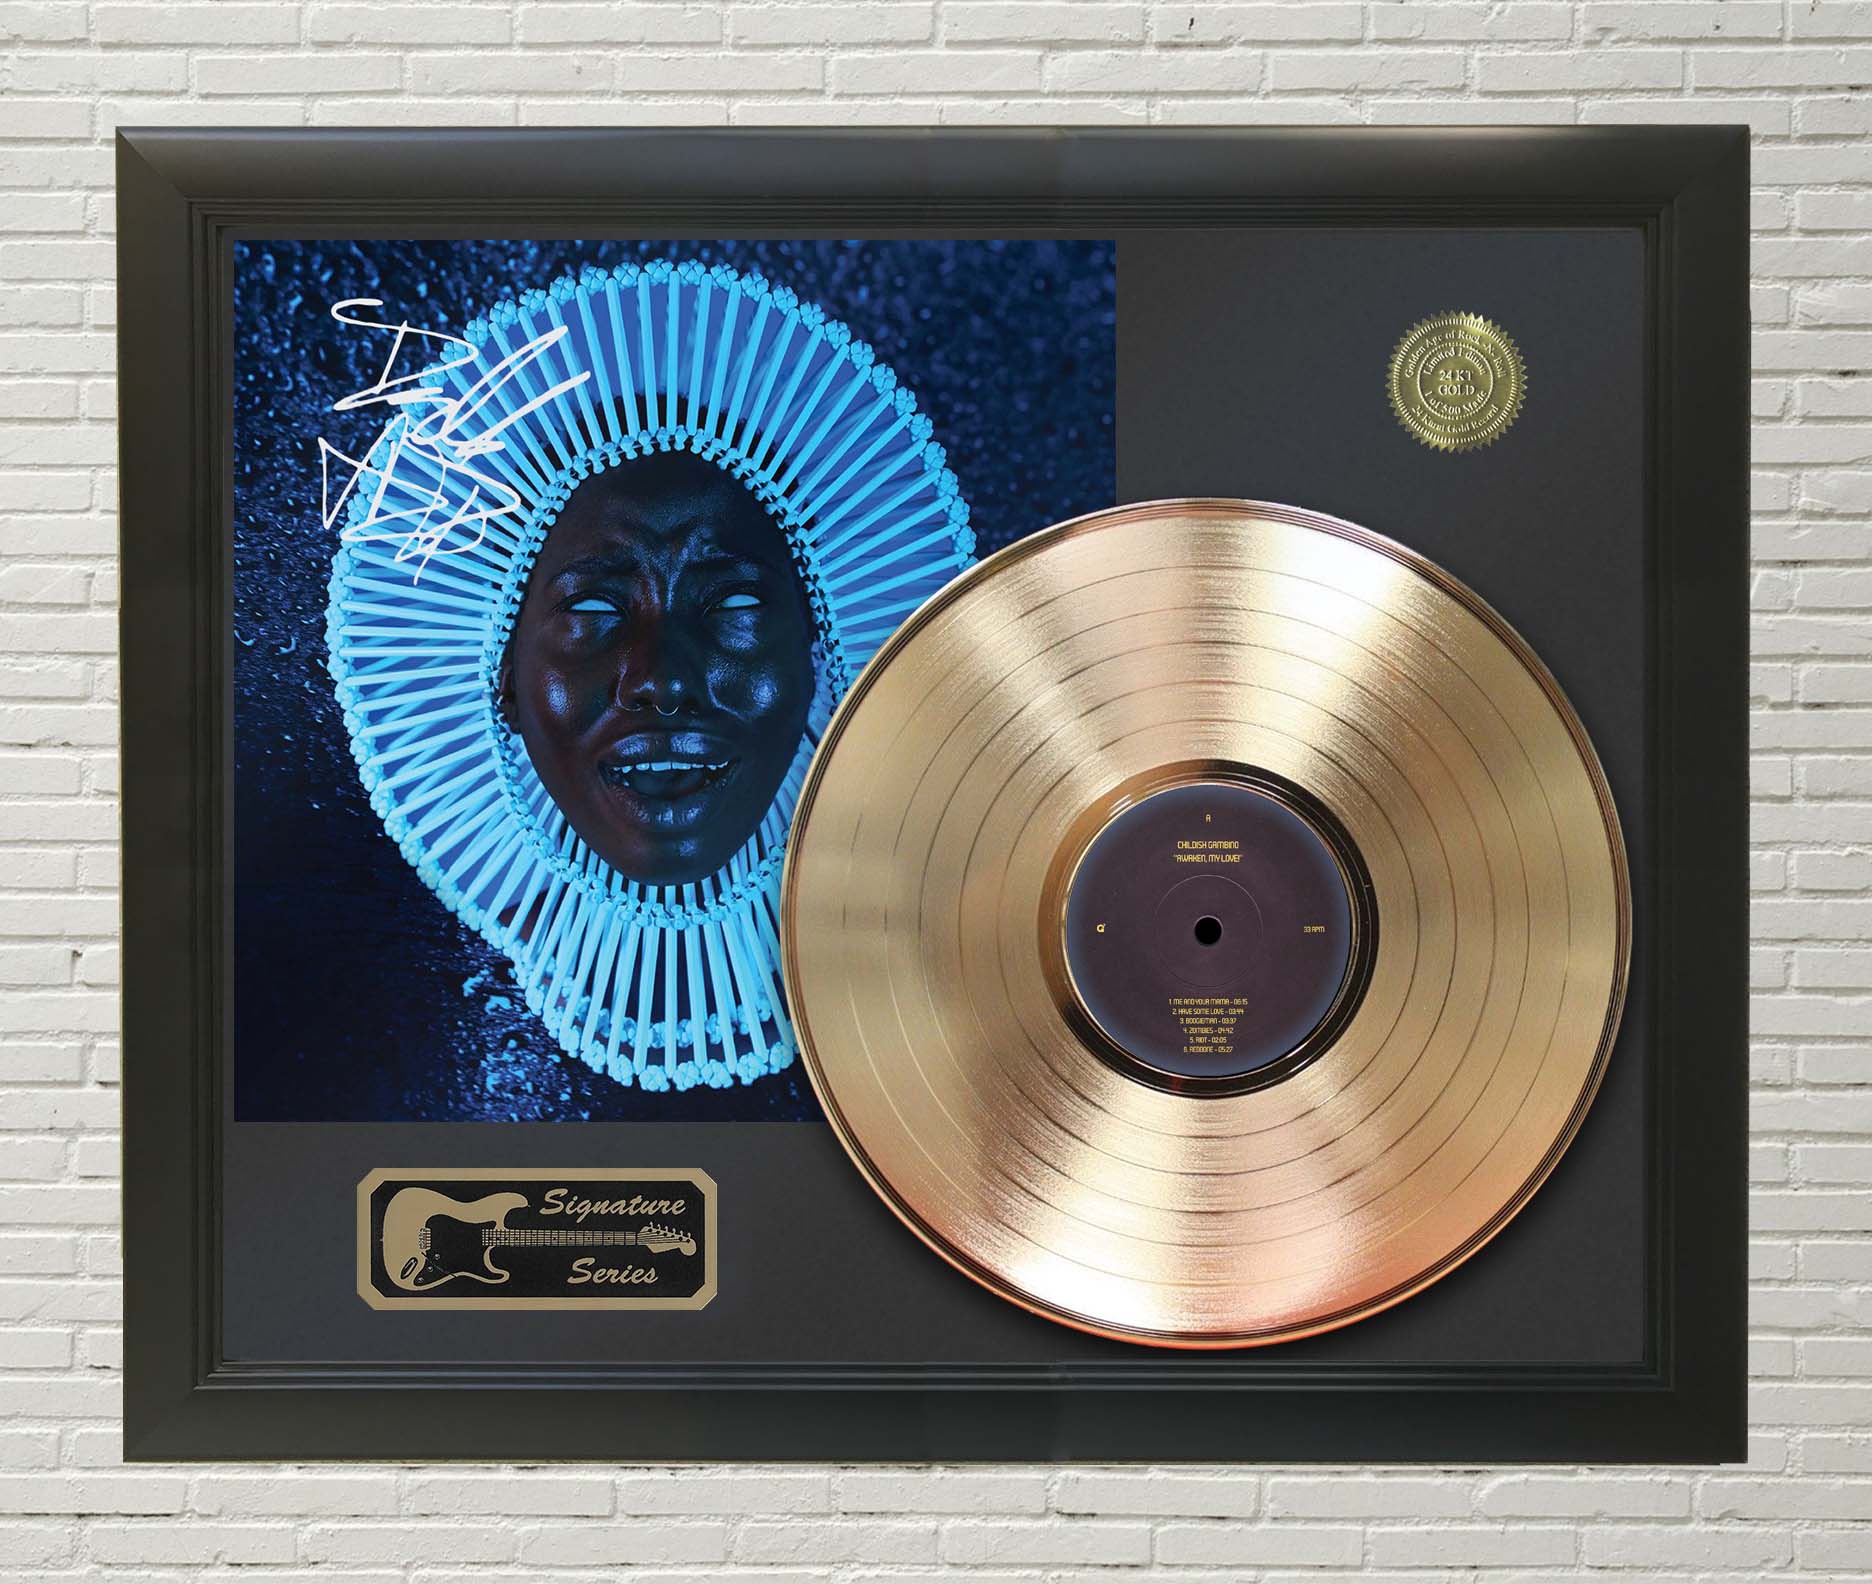 Besøg bedsteforældre bassin St Childish Gambino - Awaken My Love Framed Signature Gold LP Record Display  M4 - Gold Record Outlet Album and Disc Collectible Memorabilia